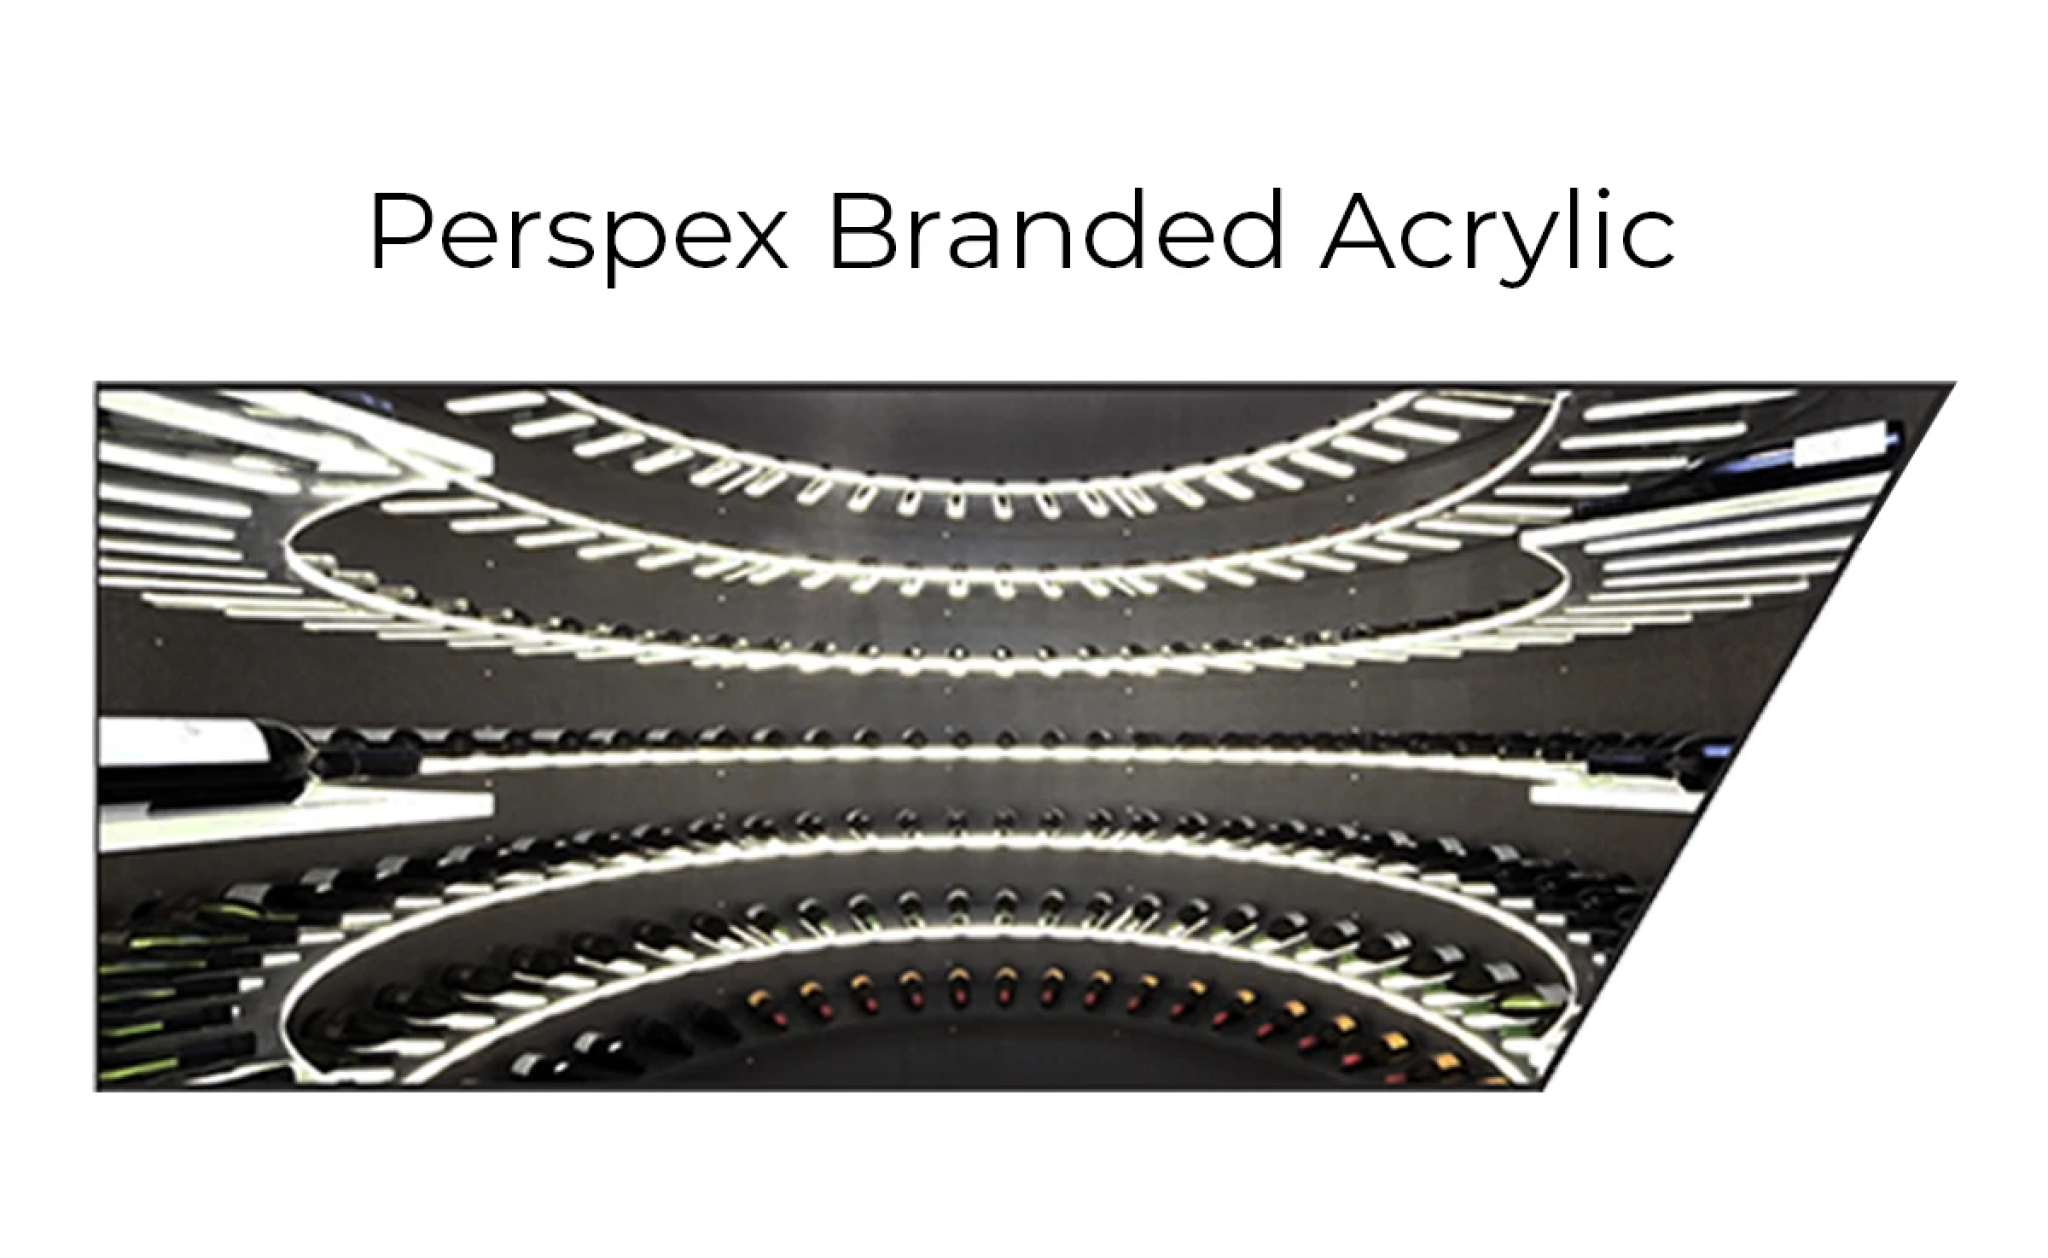 Perxpex branded acrylic mobile compressed.png